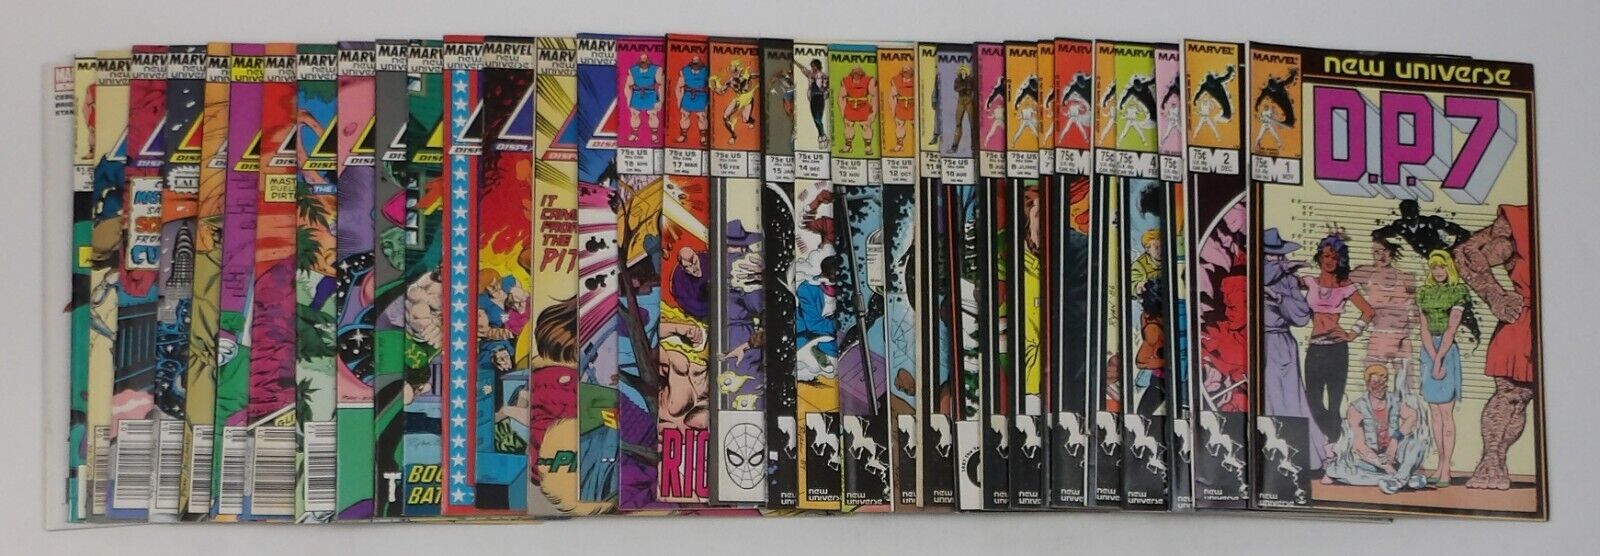 D.P.7 #1-32 FN/VF/NM complete series + Annual - Marvel - New Universe  - DP7 set